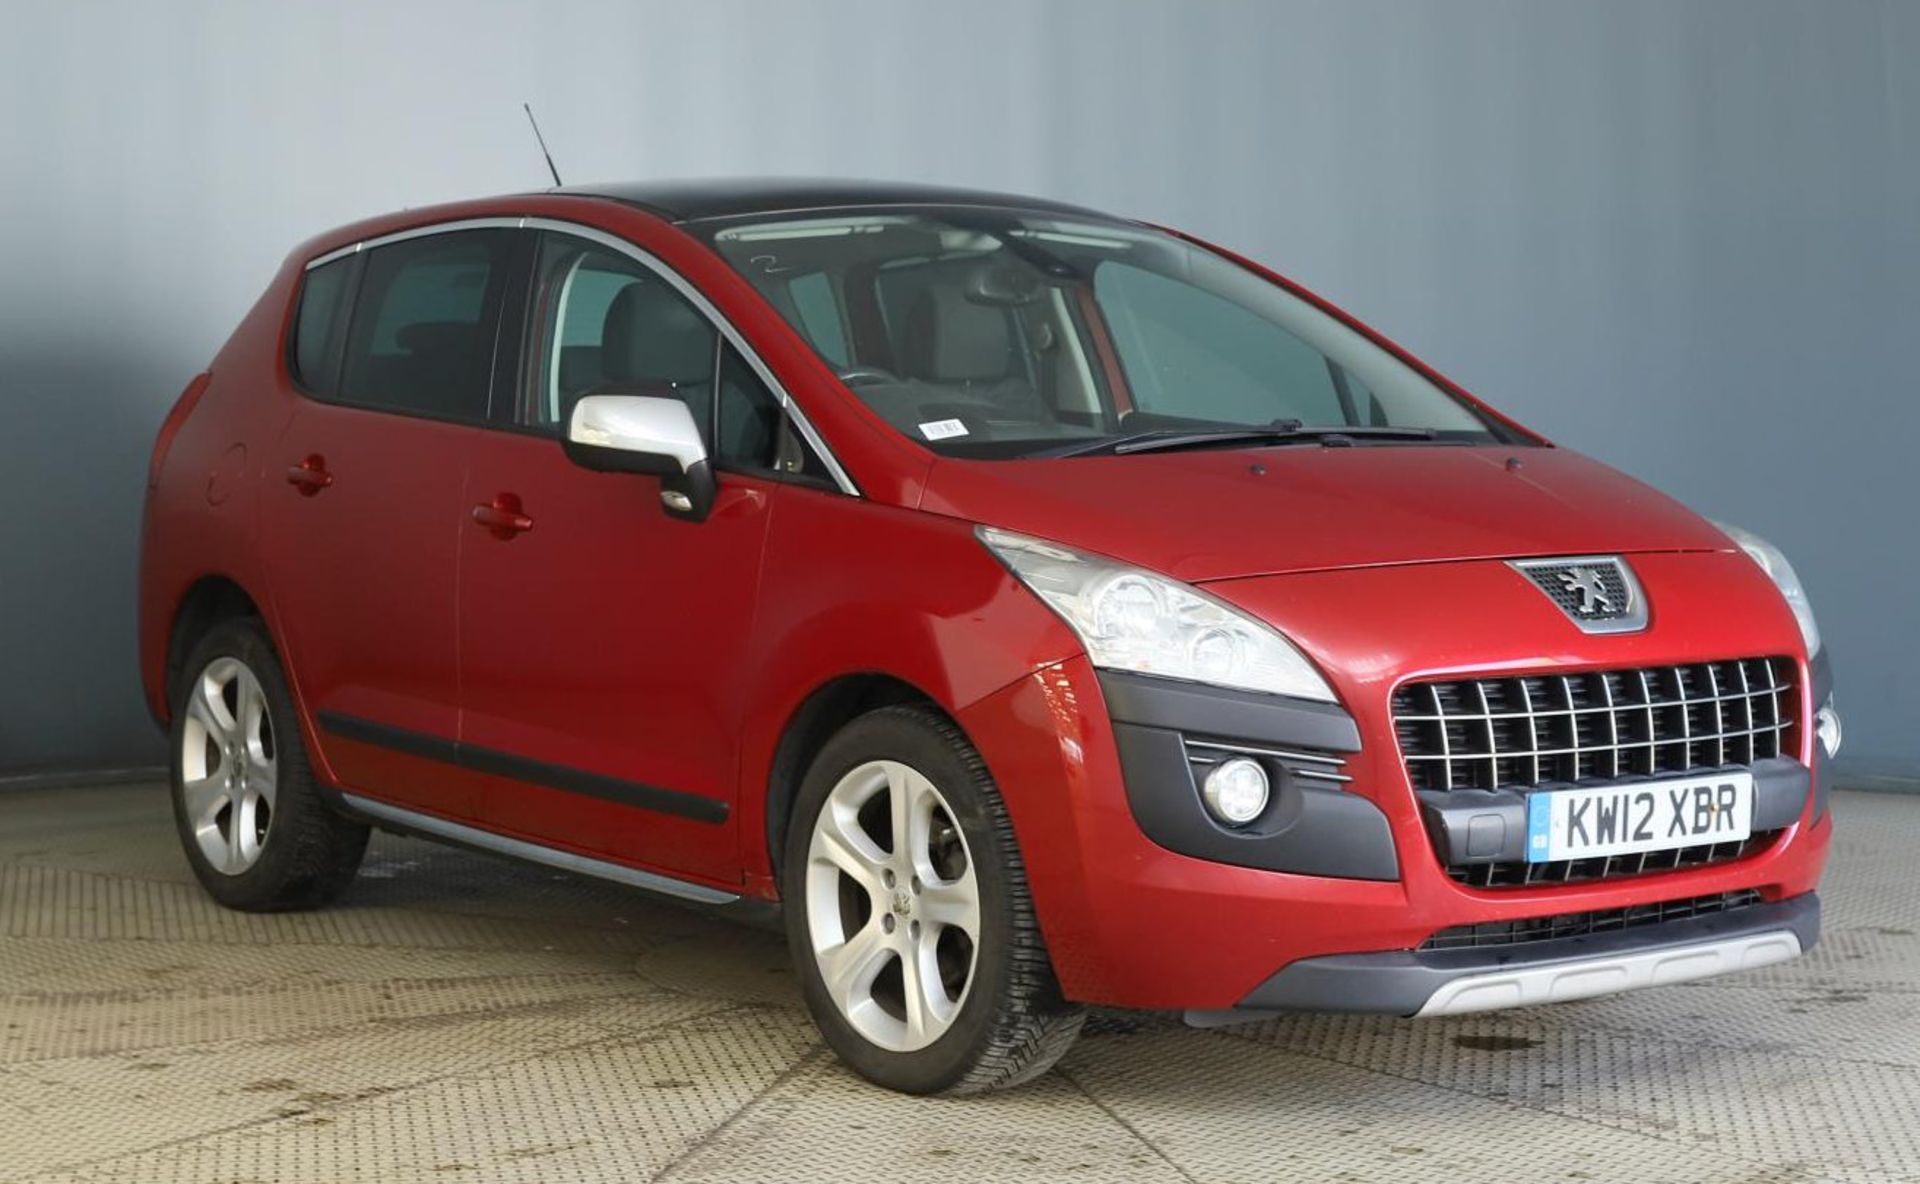 2012 Peugeot 3008 2.0 Hdi Allure 5 Door MPV - CL505 - NO VAT ON THE HAMMER - Location: Corby, Northa - Image 6 of 12